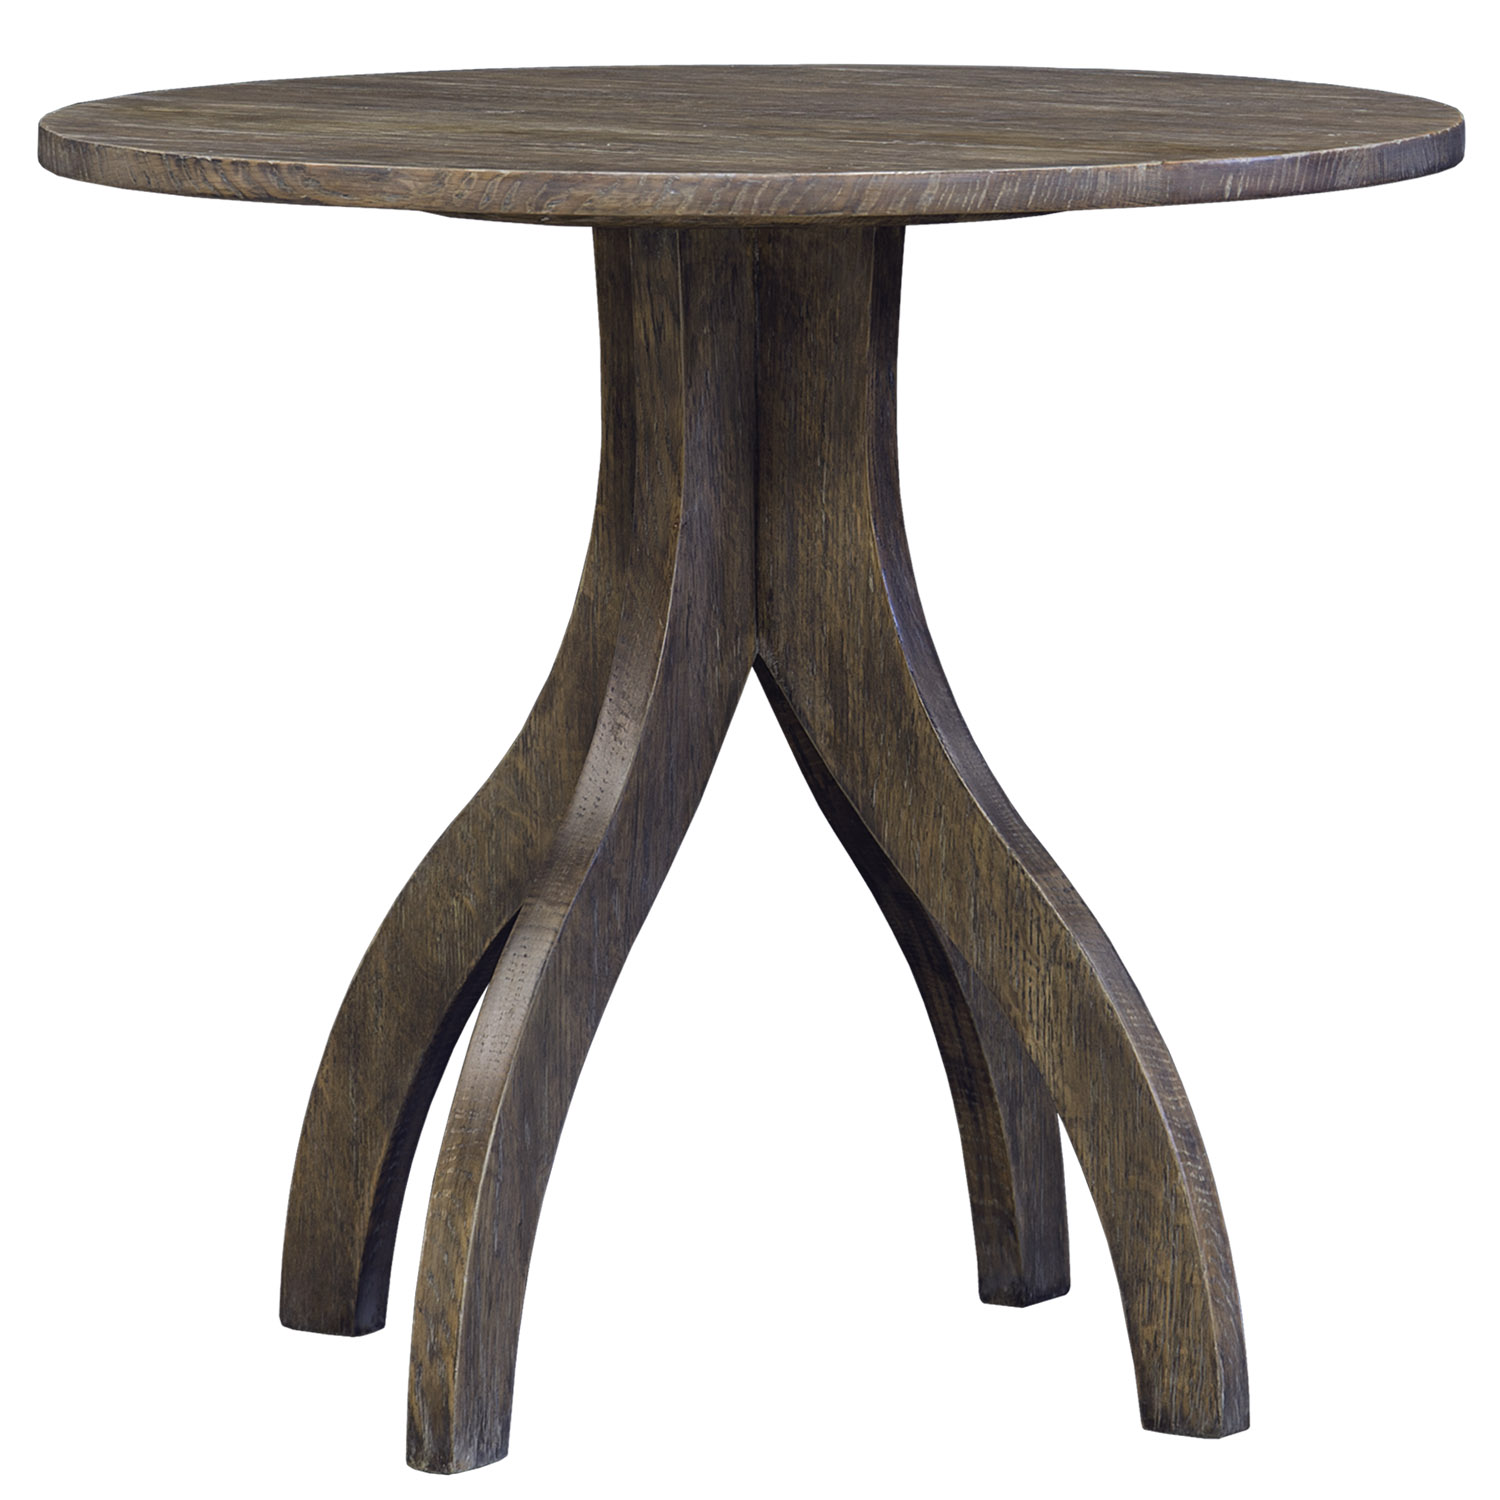 Celeste contemporary modern round wirebrushed oak side or end table by Woodland furniture in Idaho Falls